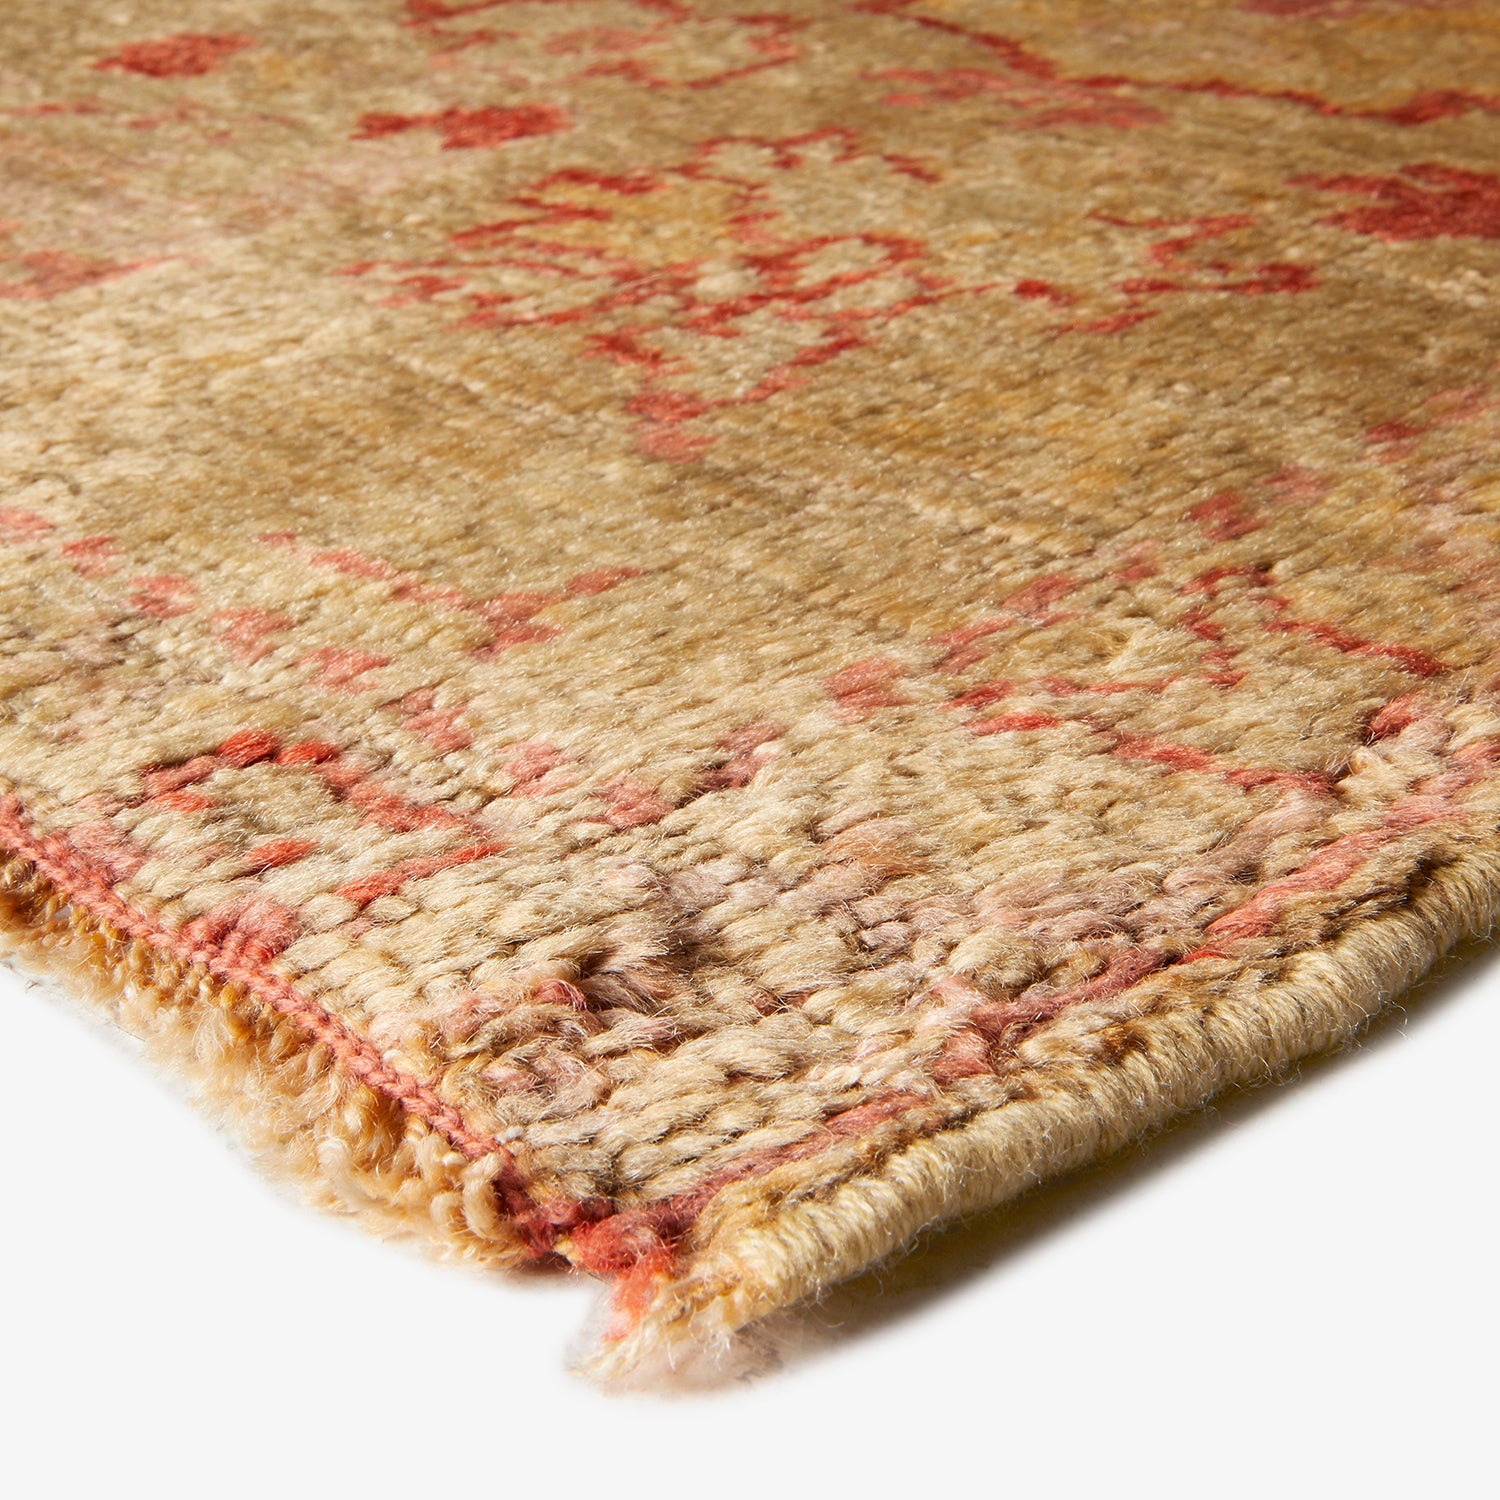 Close-up of a high-quality, textured rug with traditional design.